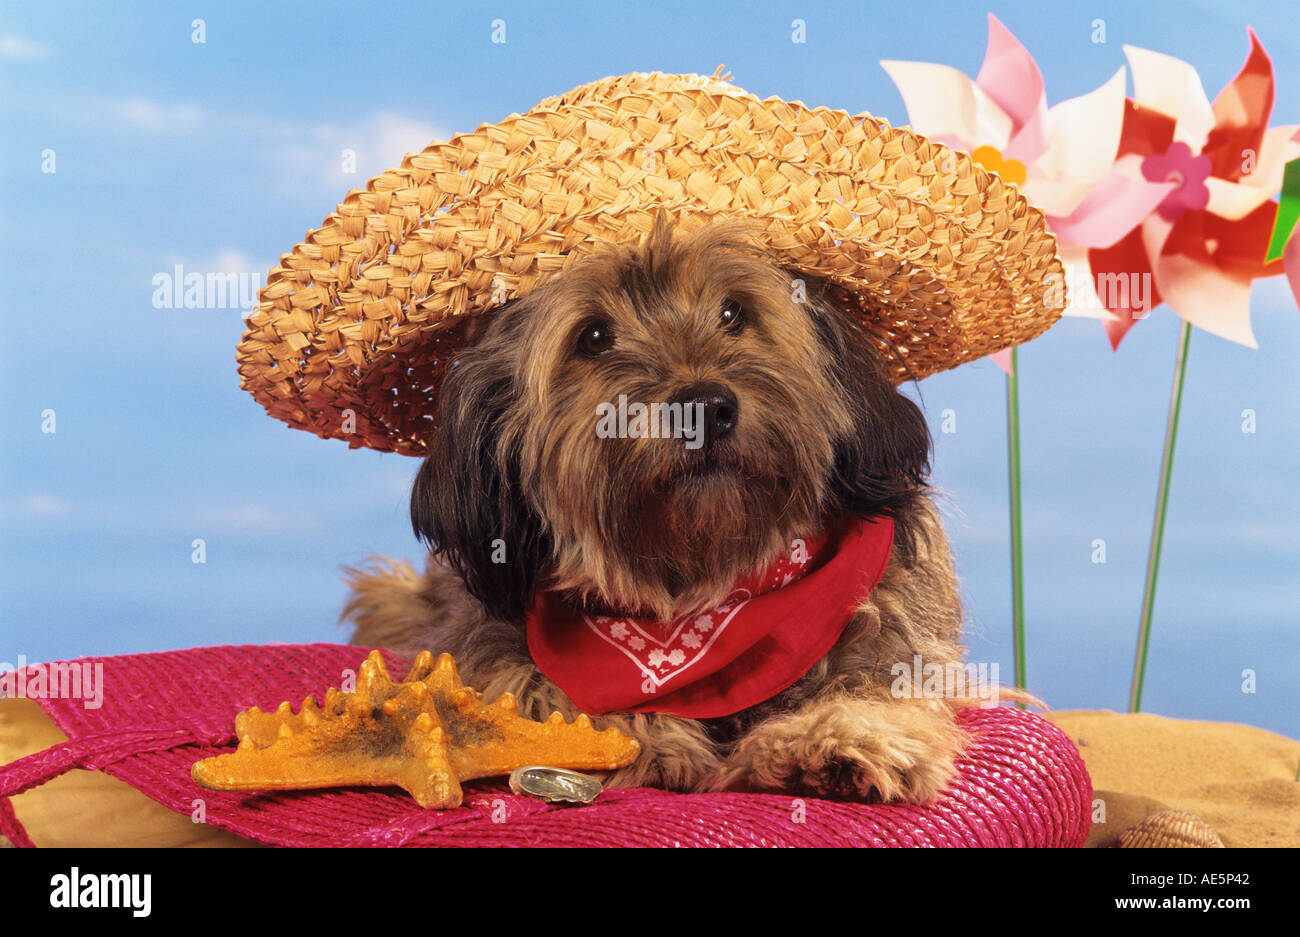 dog with sun hat at beach Stock Photo